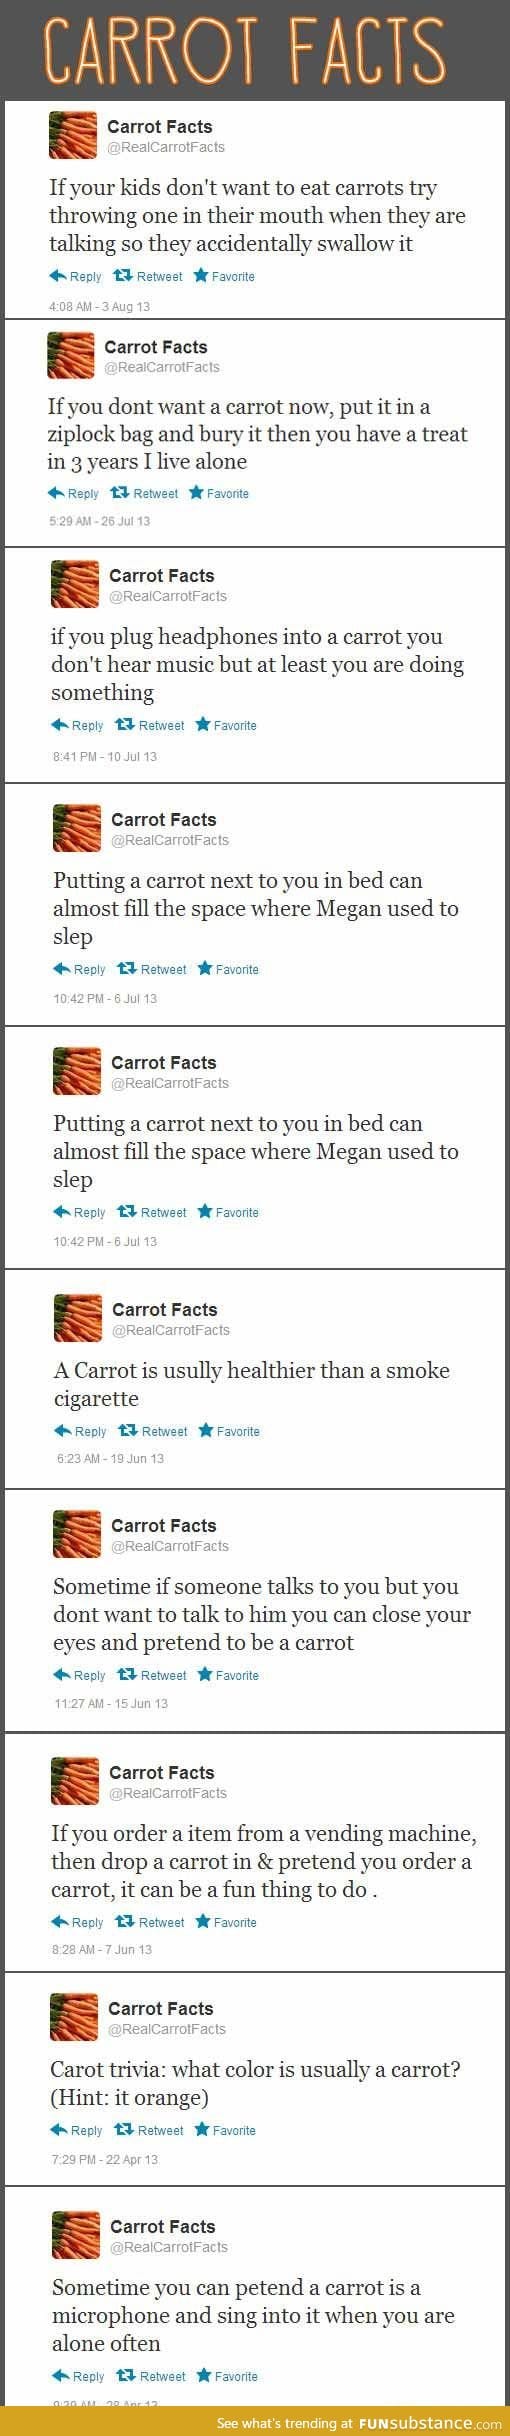 Carrot facts